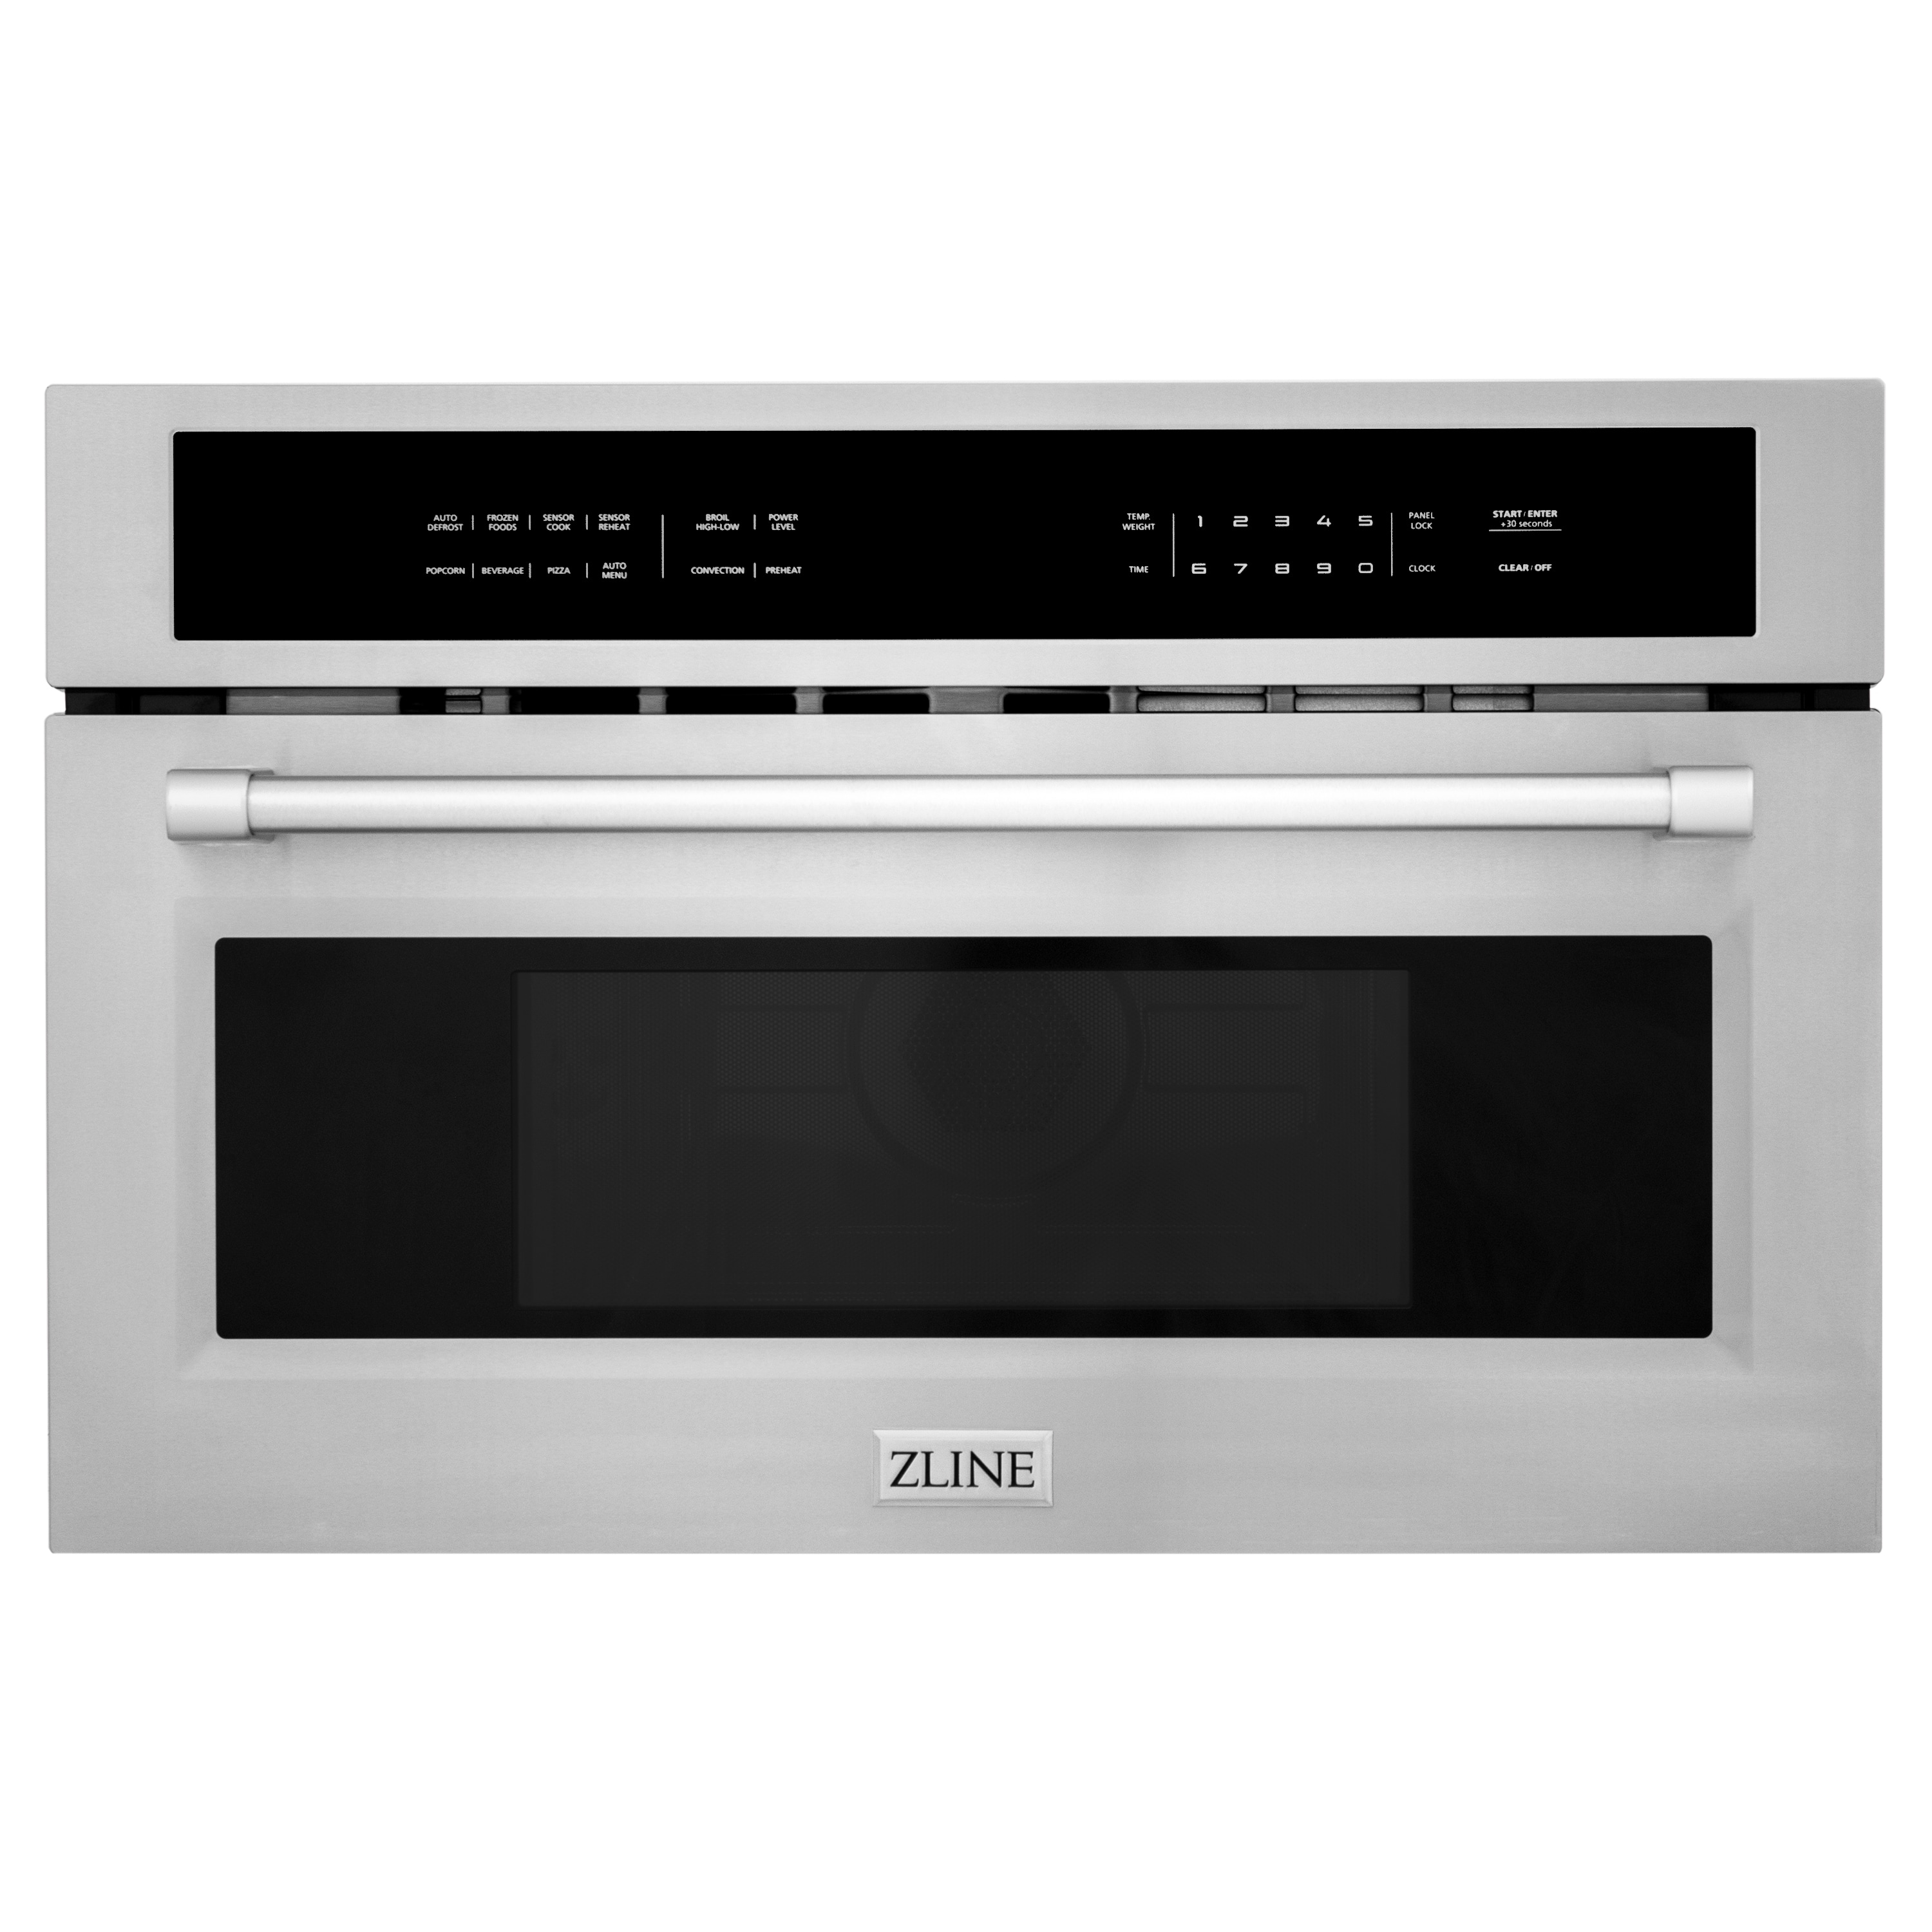 Kucht 1.6-cu ft 1000-Watt Built-In Microwave with Sensor Cooking Controls  Air Fry (Stainless Steel)